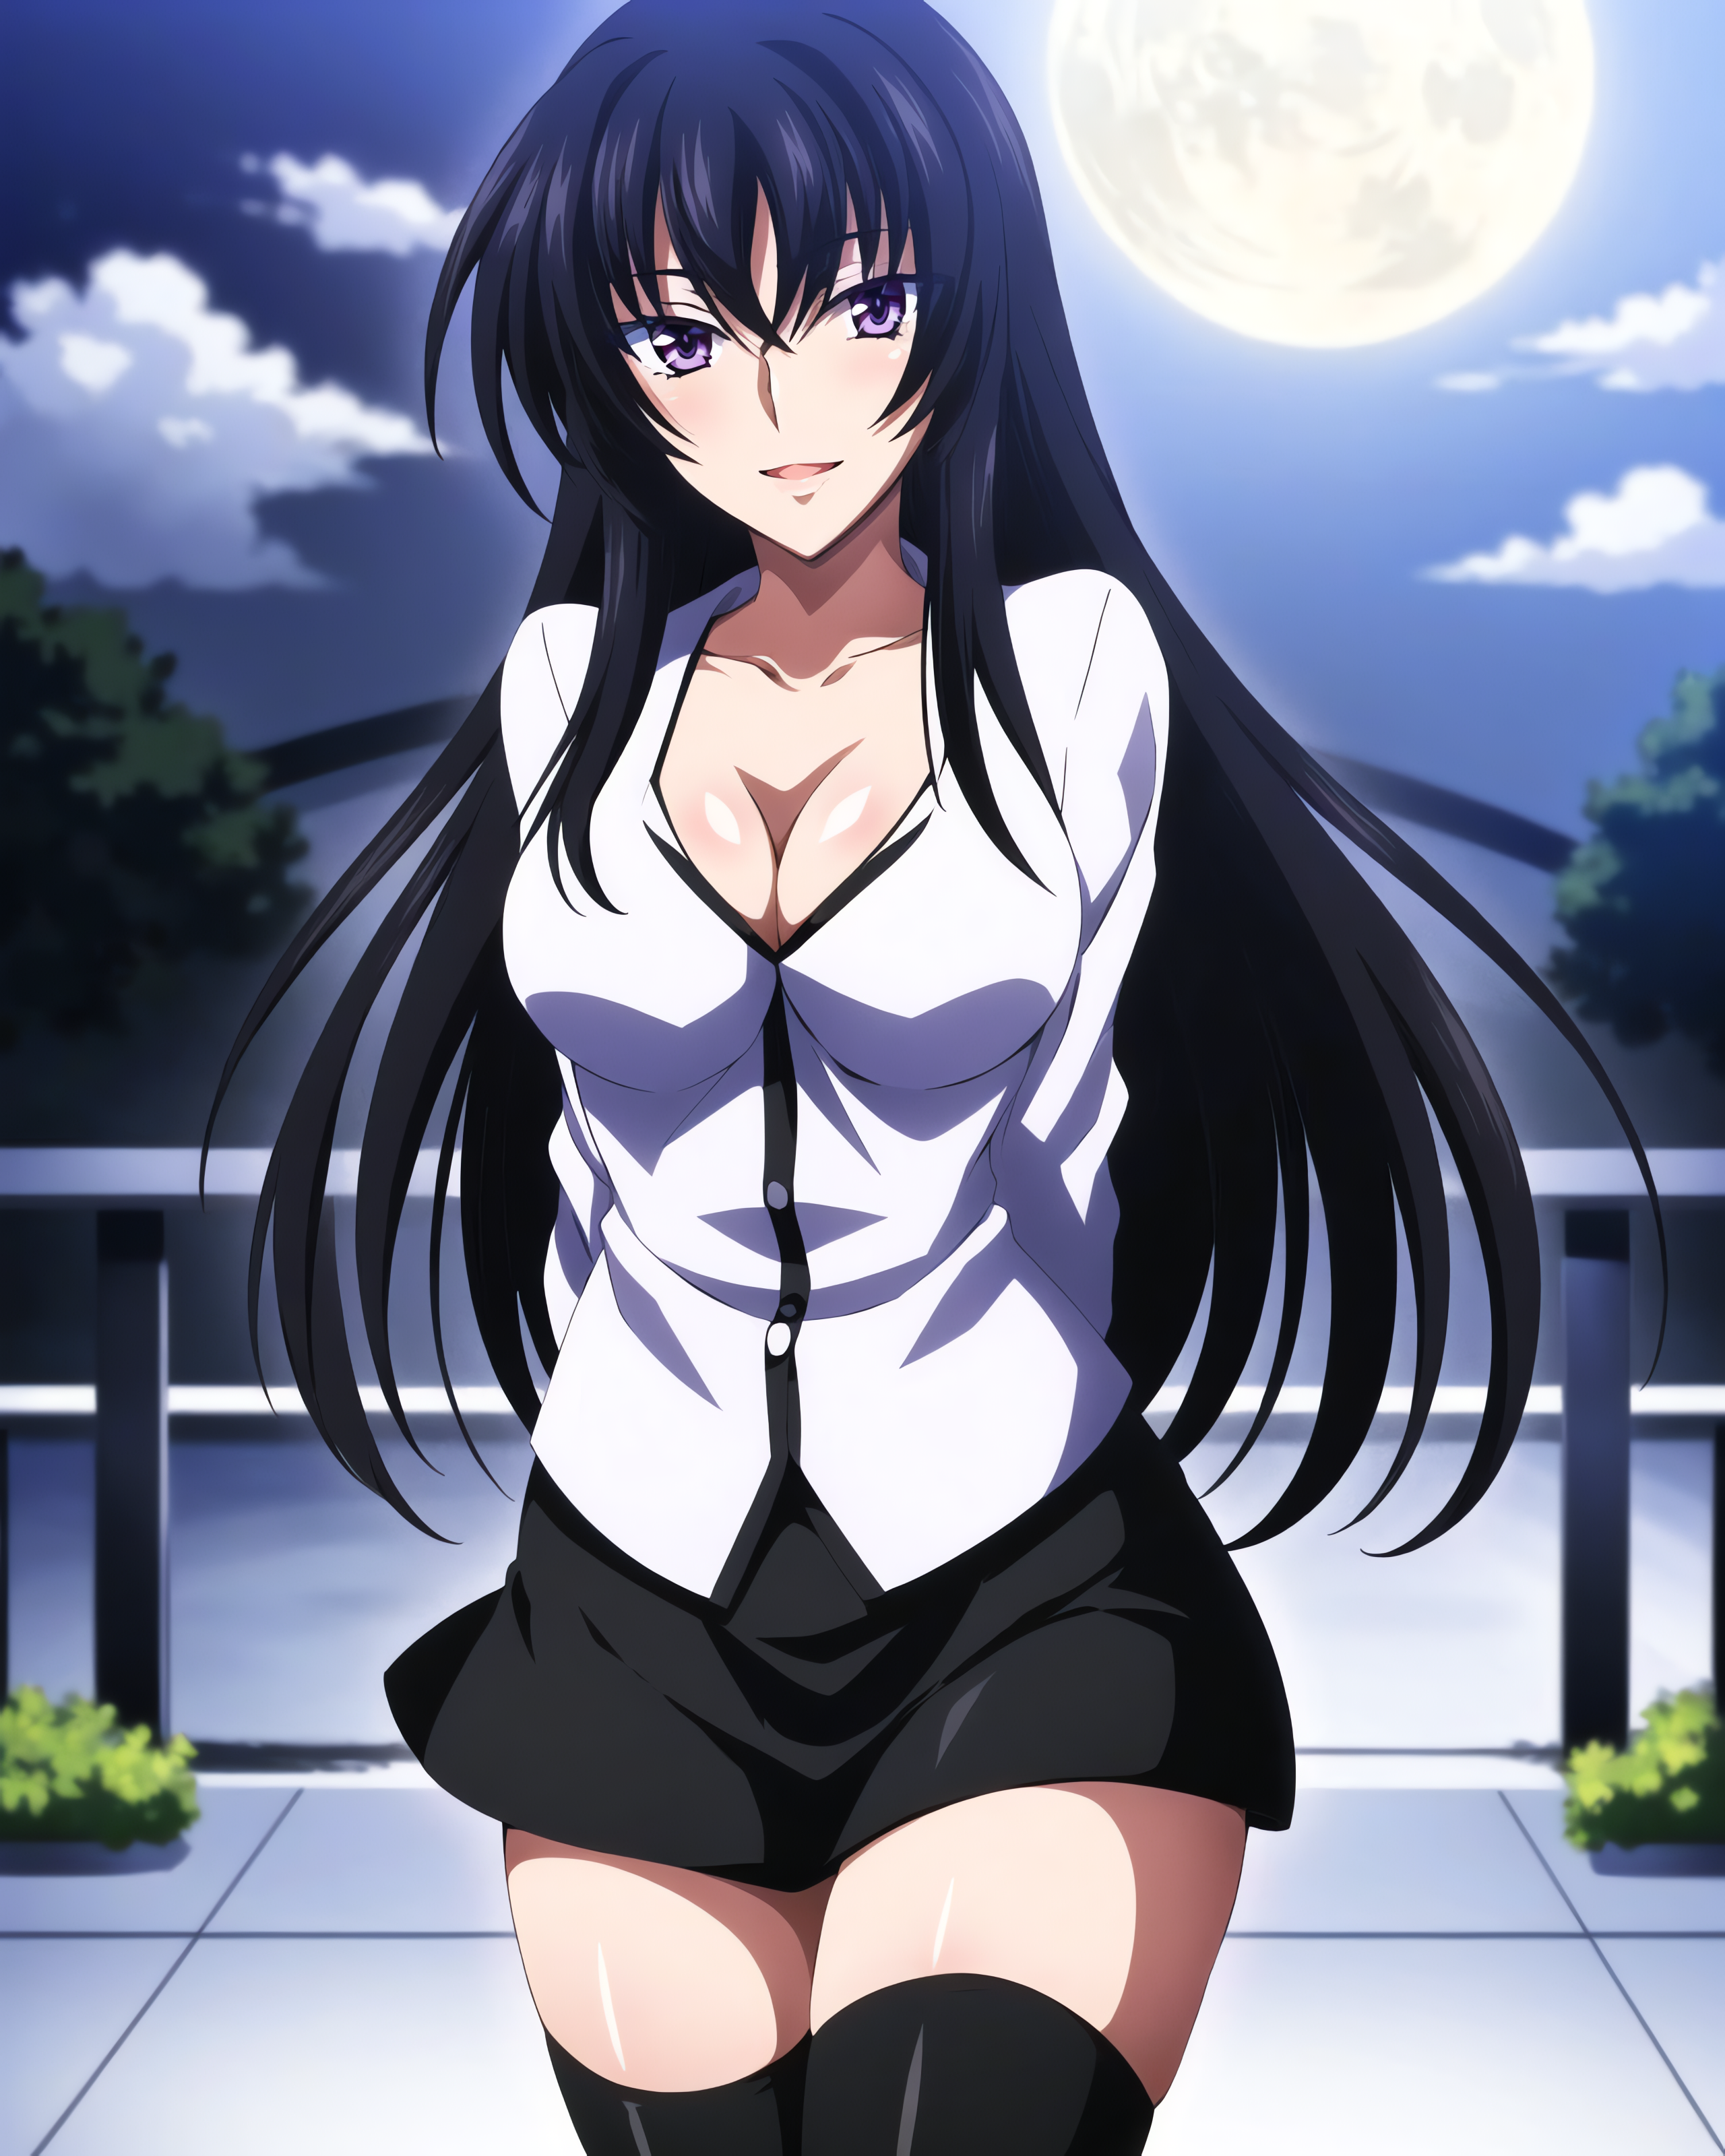 Raynare, High School DXD anime character in a